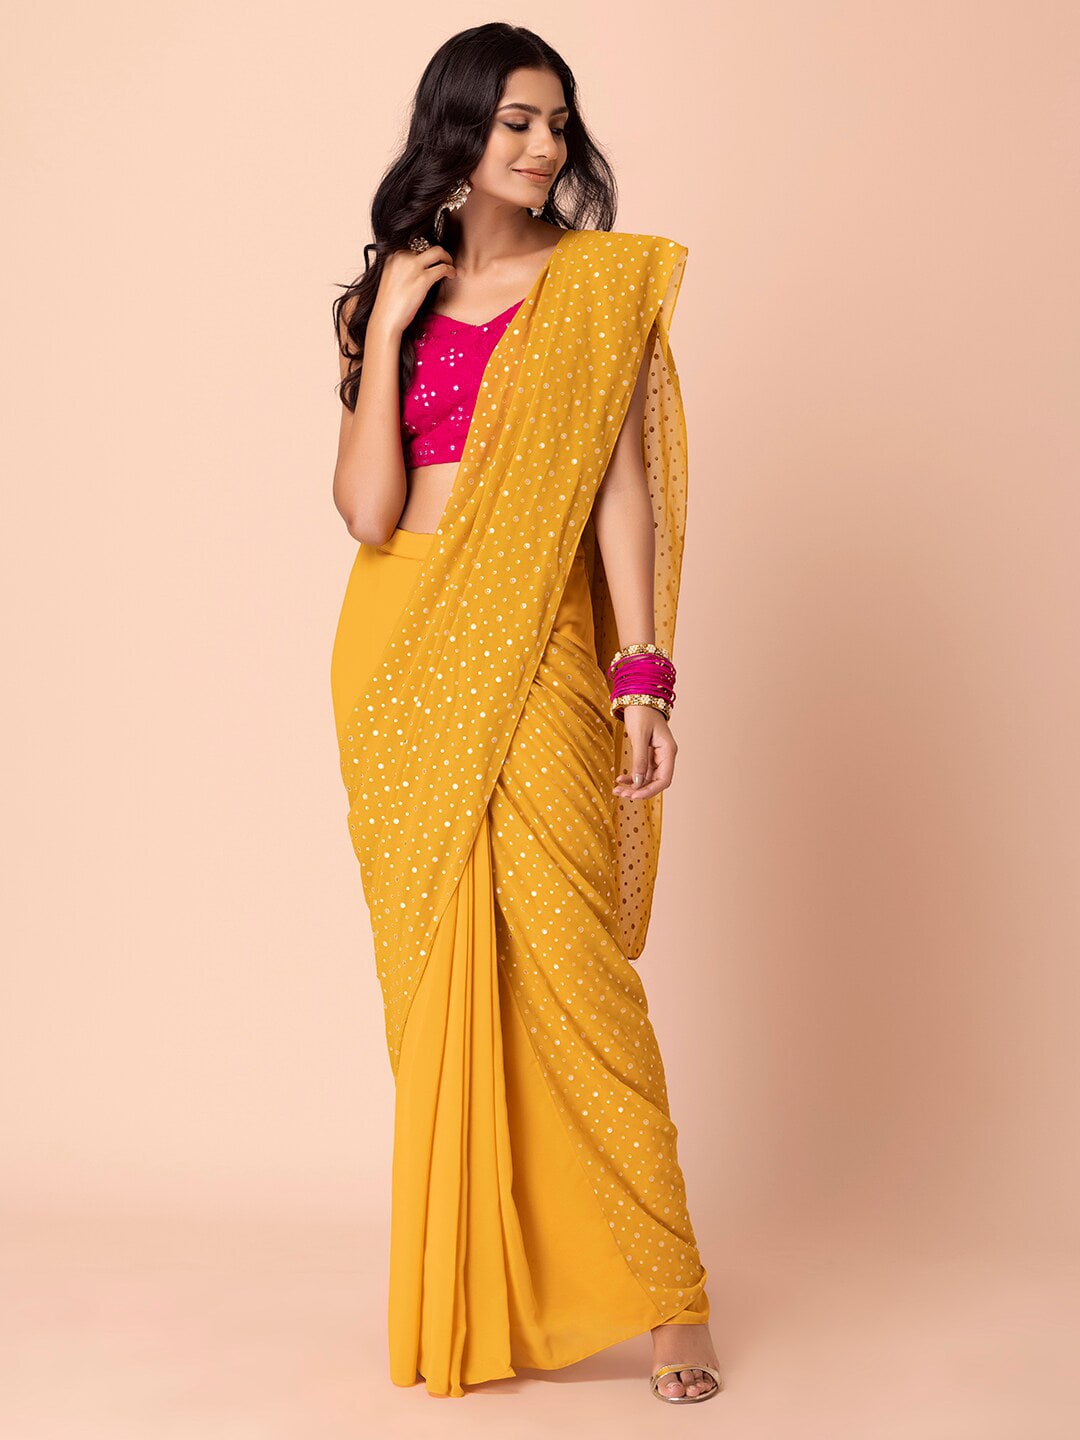 INDYA Foil Printed Pre-Stitched Saree Price in India